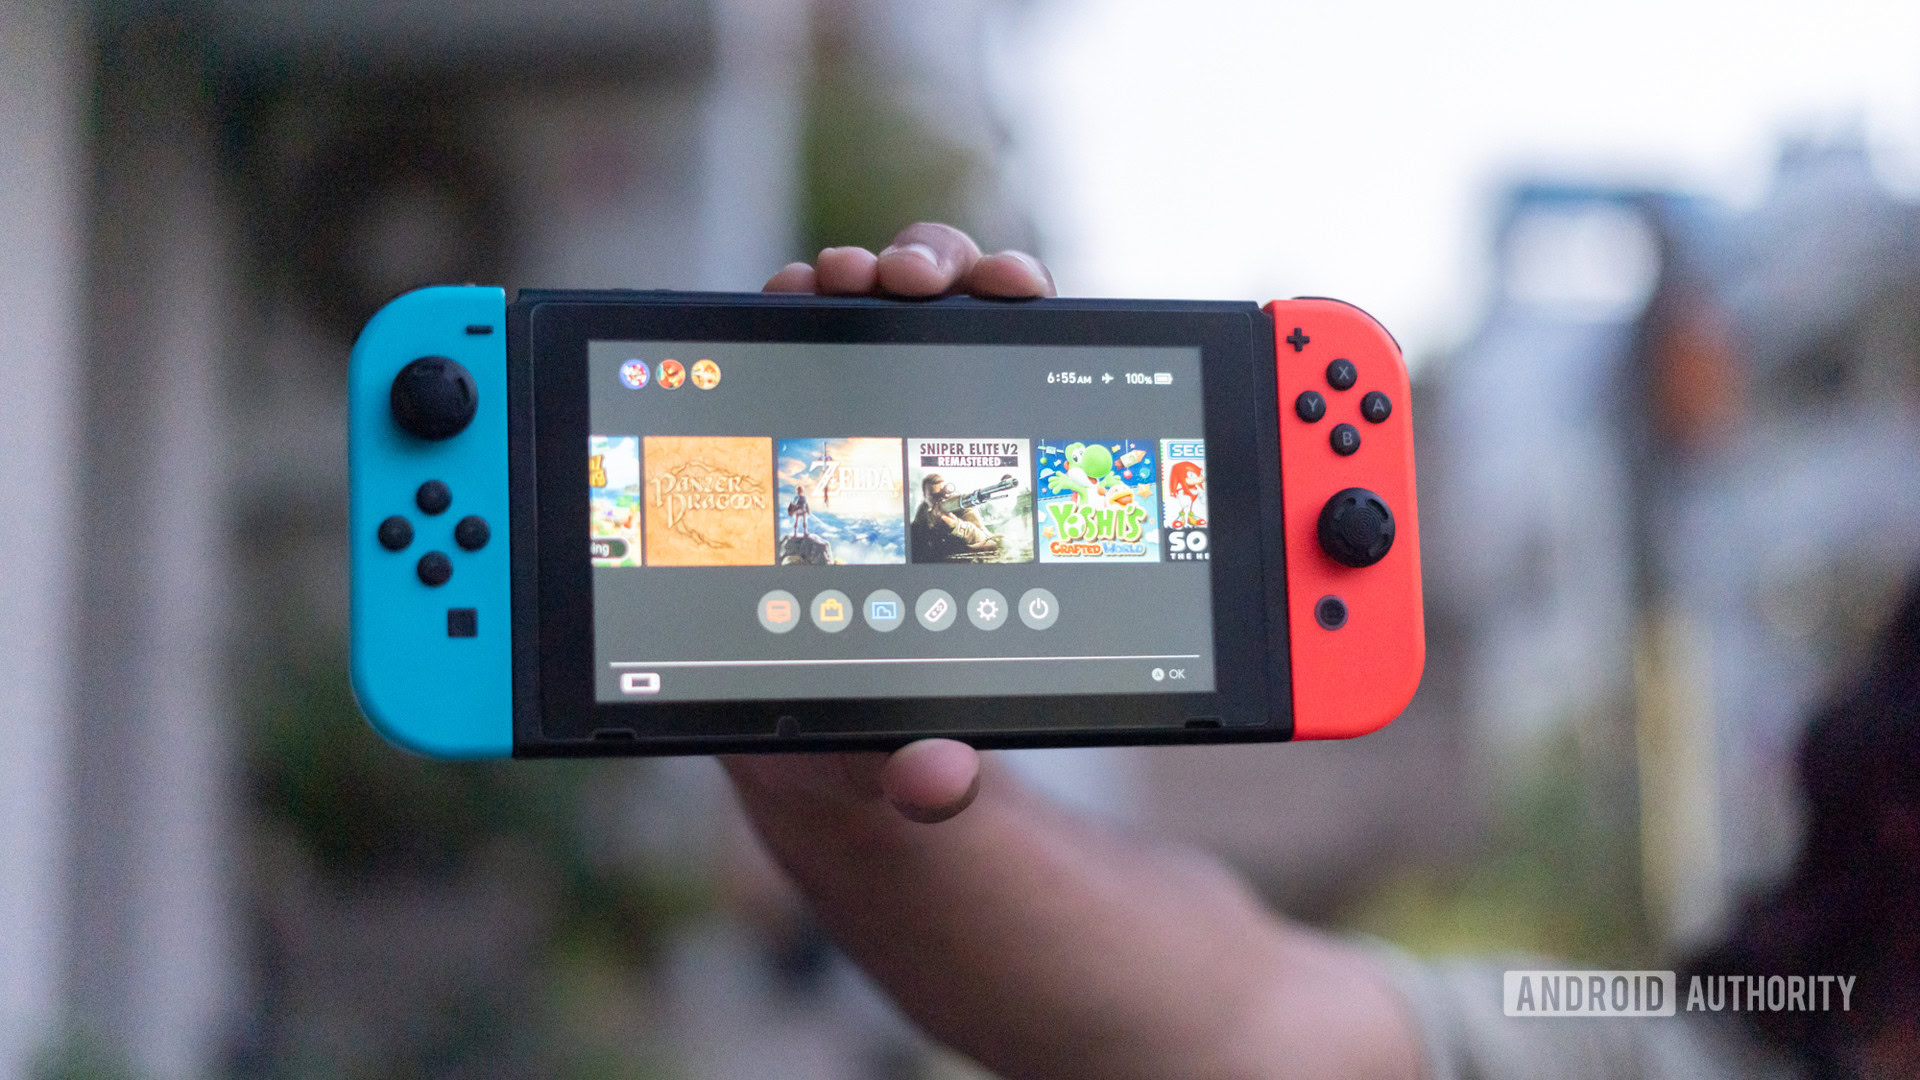 Nintendo Switch OLED: Price, Specs, and How to Buy